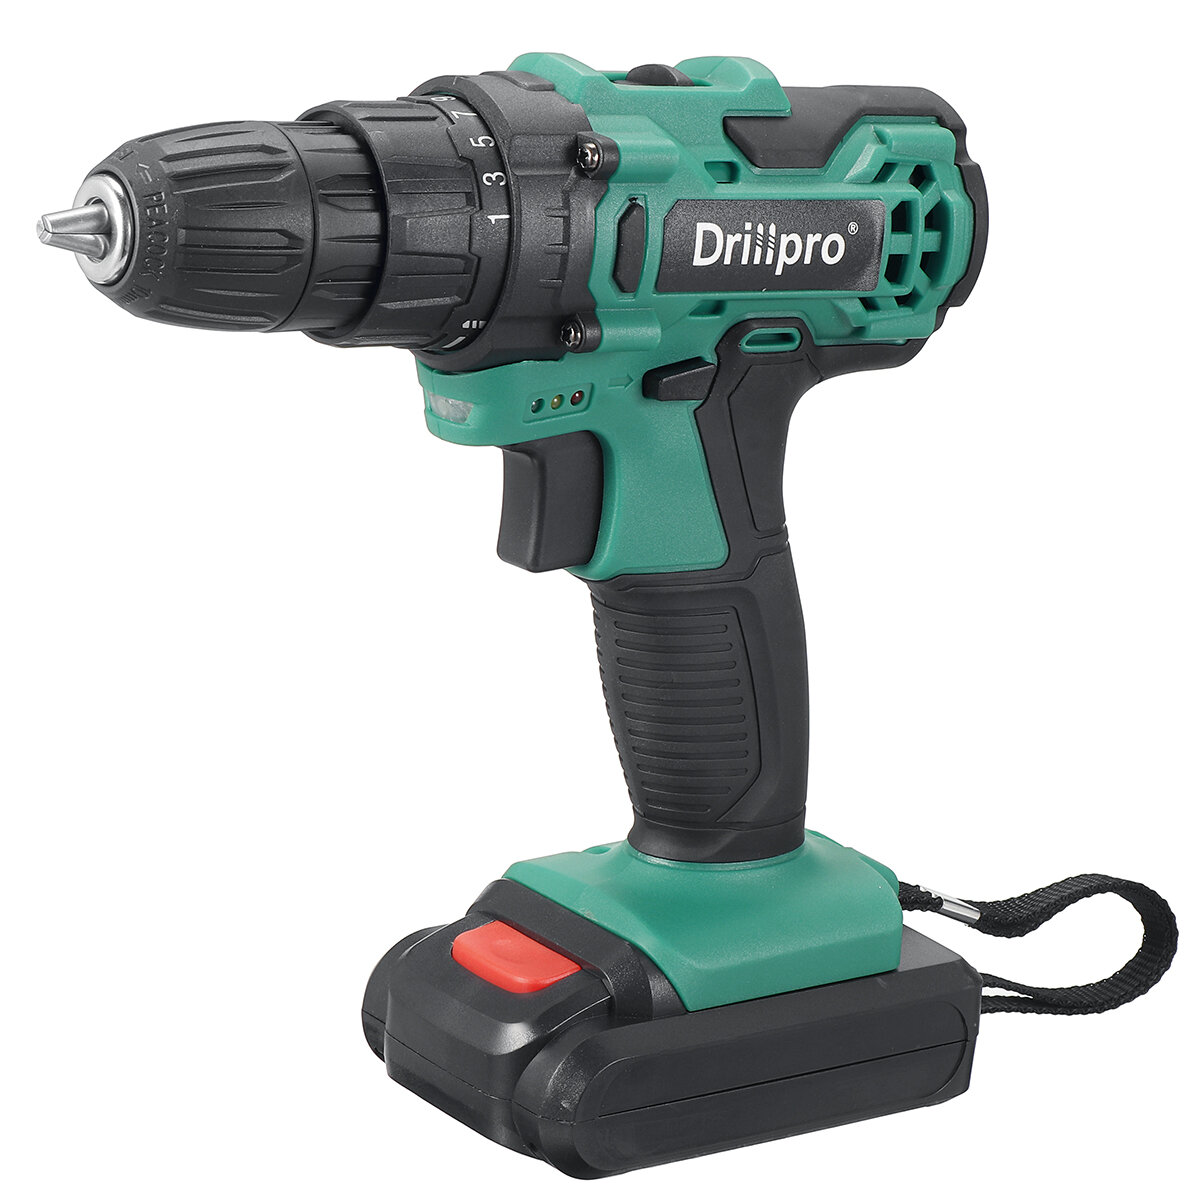 Image of Drillpro 21V 15AH Cordless Drill Rechargeable 2 Speed Electric Drill Screwdriver W/ 1 or 2pcs Battery